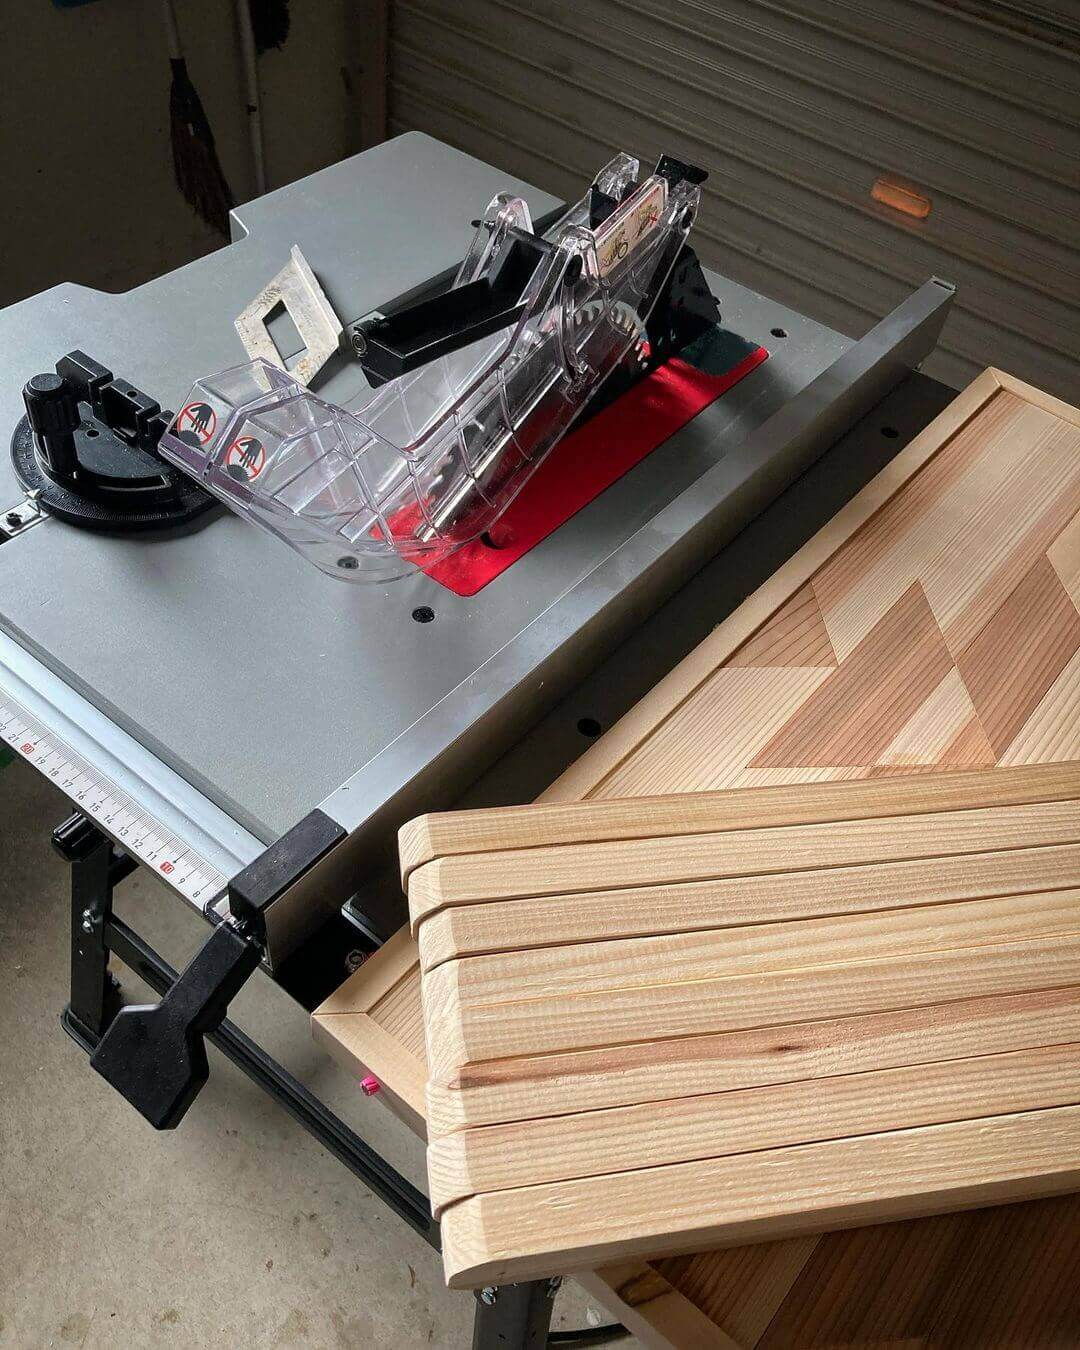 What is a table saw used for